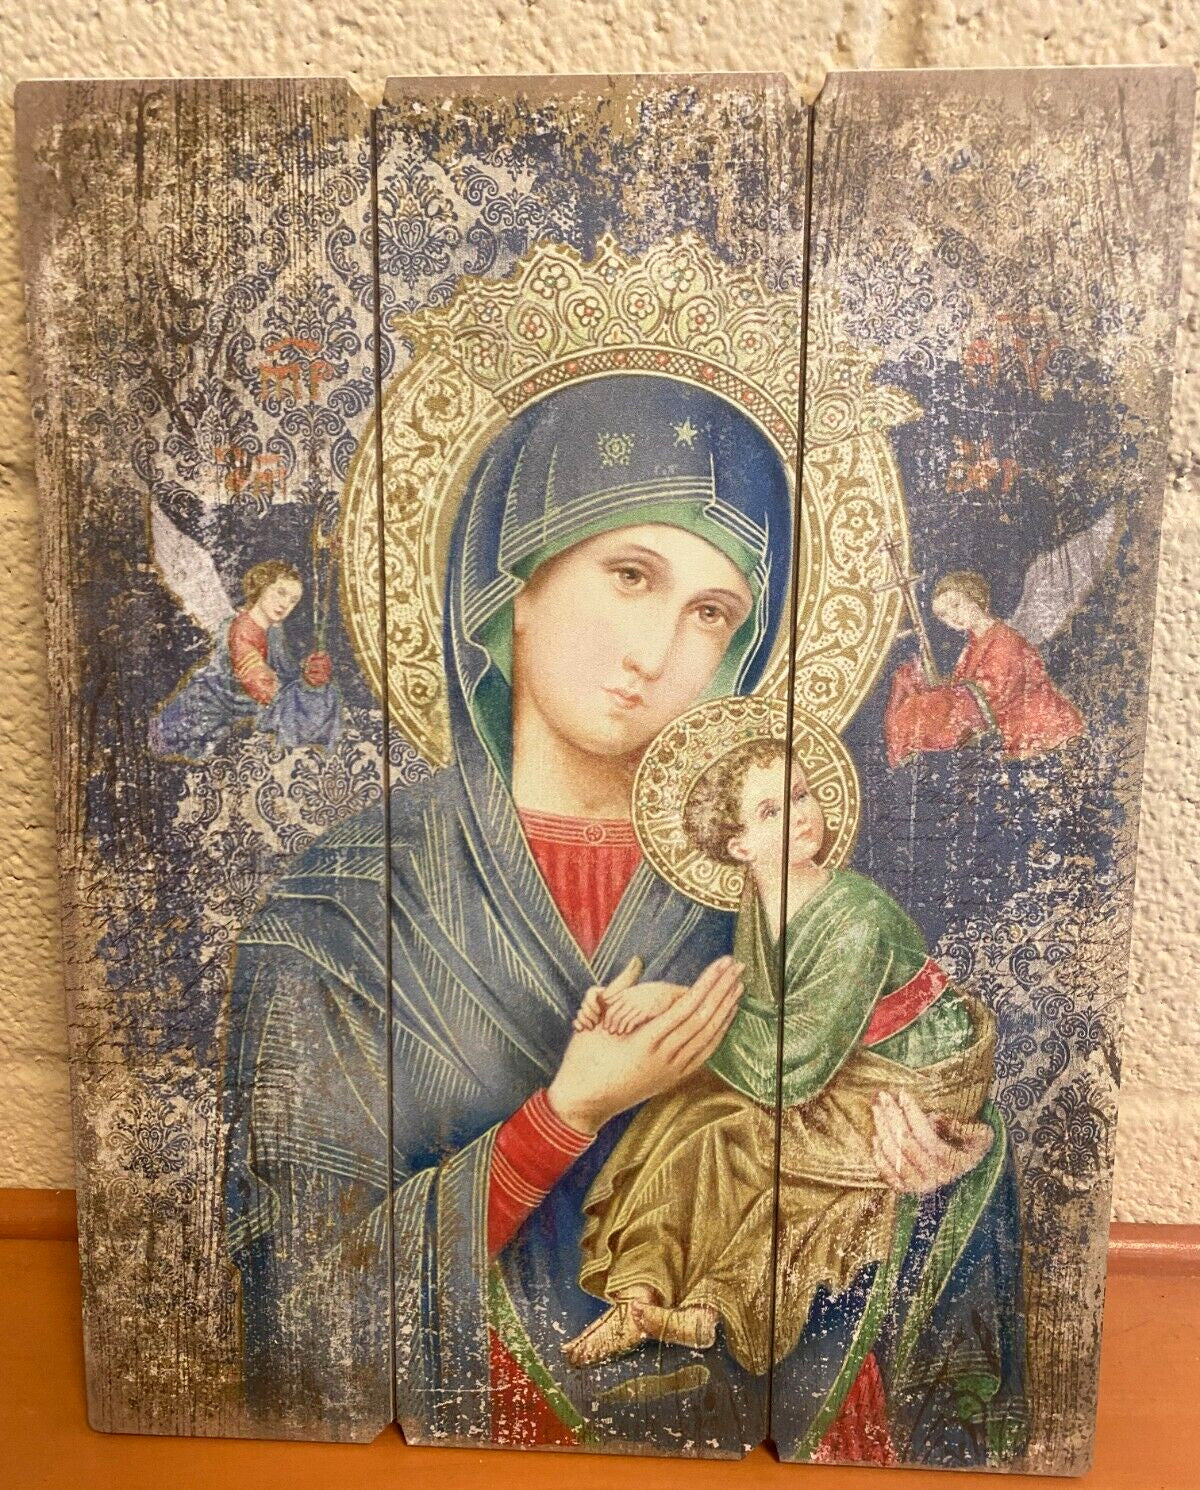 Our Lady of Perpetual Help Image on Wood Pallet, New - Bob and Penny Lord